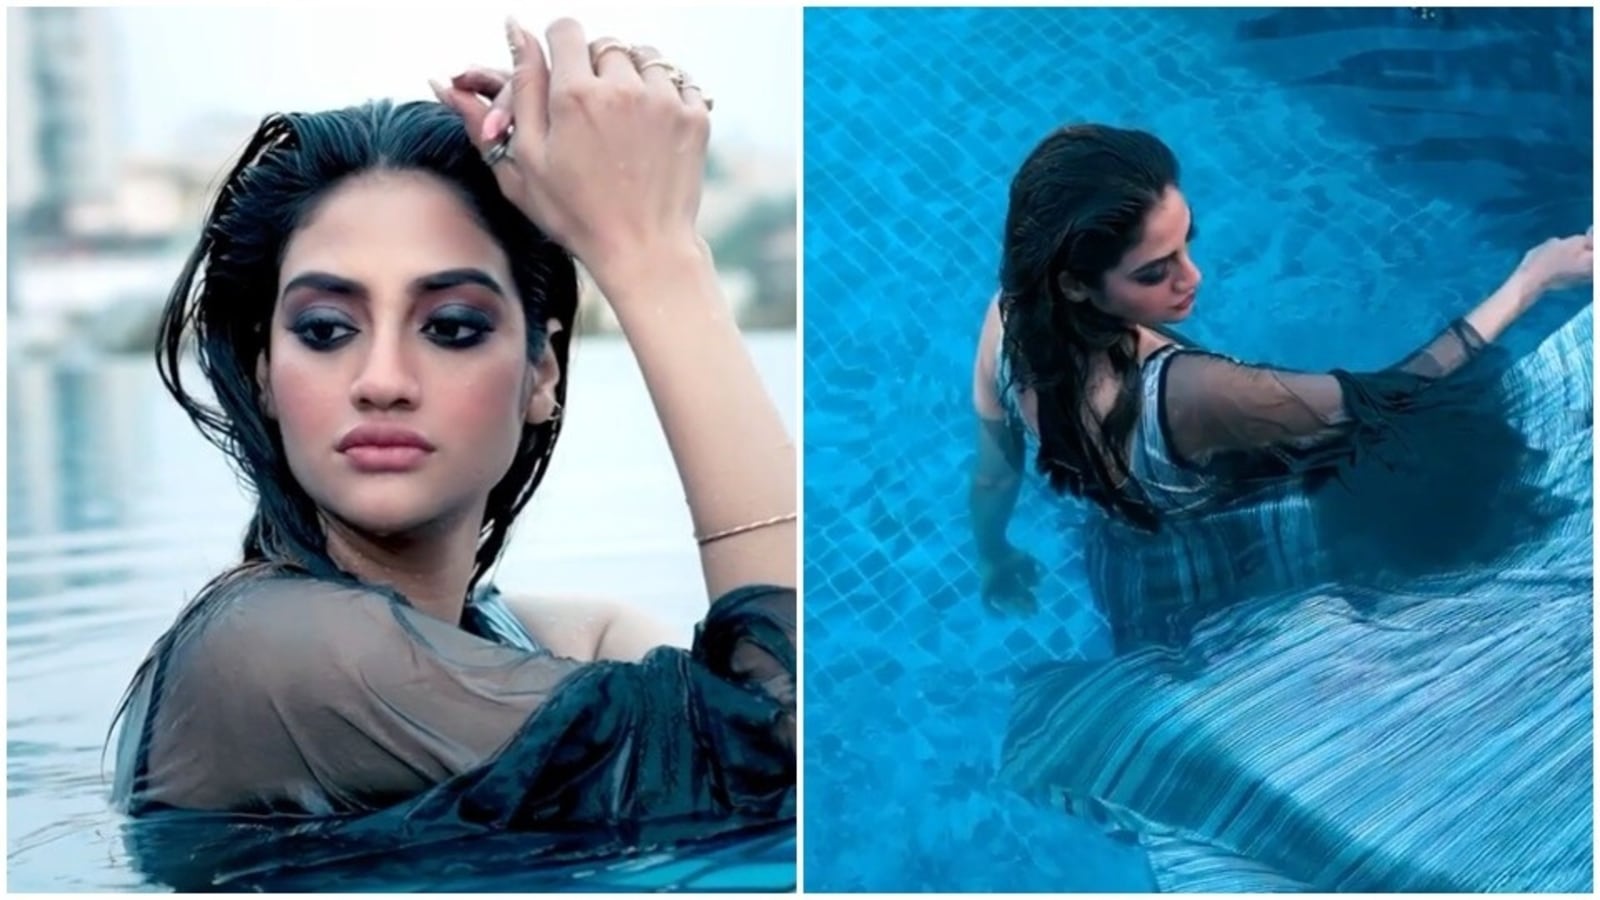 Nusrat Jahan Xx Video - Pregnant Nusrat Jahan takes a dip in pool for photoshoot, promotes  contraceptive pills on Instagram - Hindustan Times